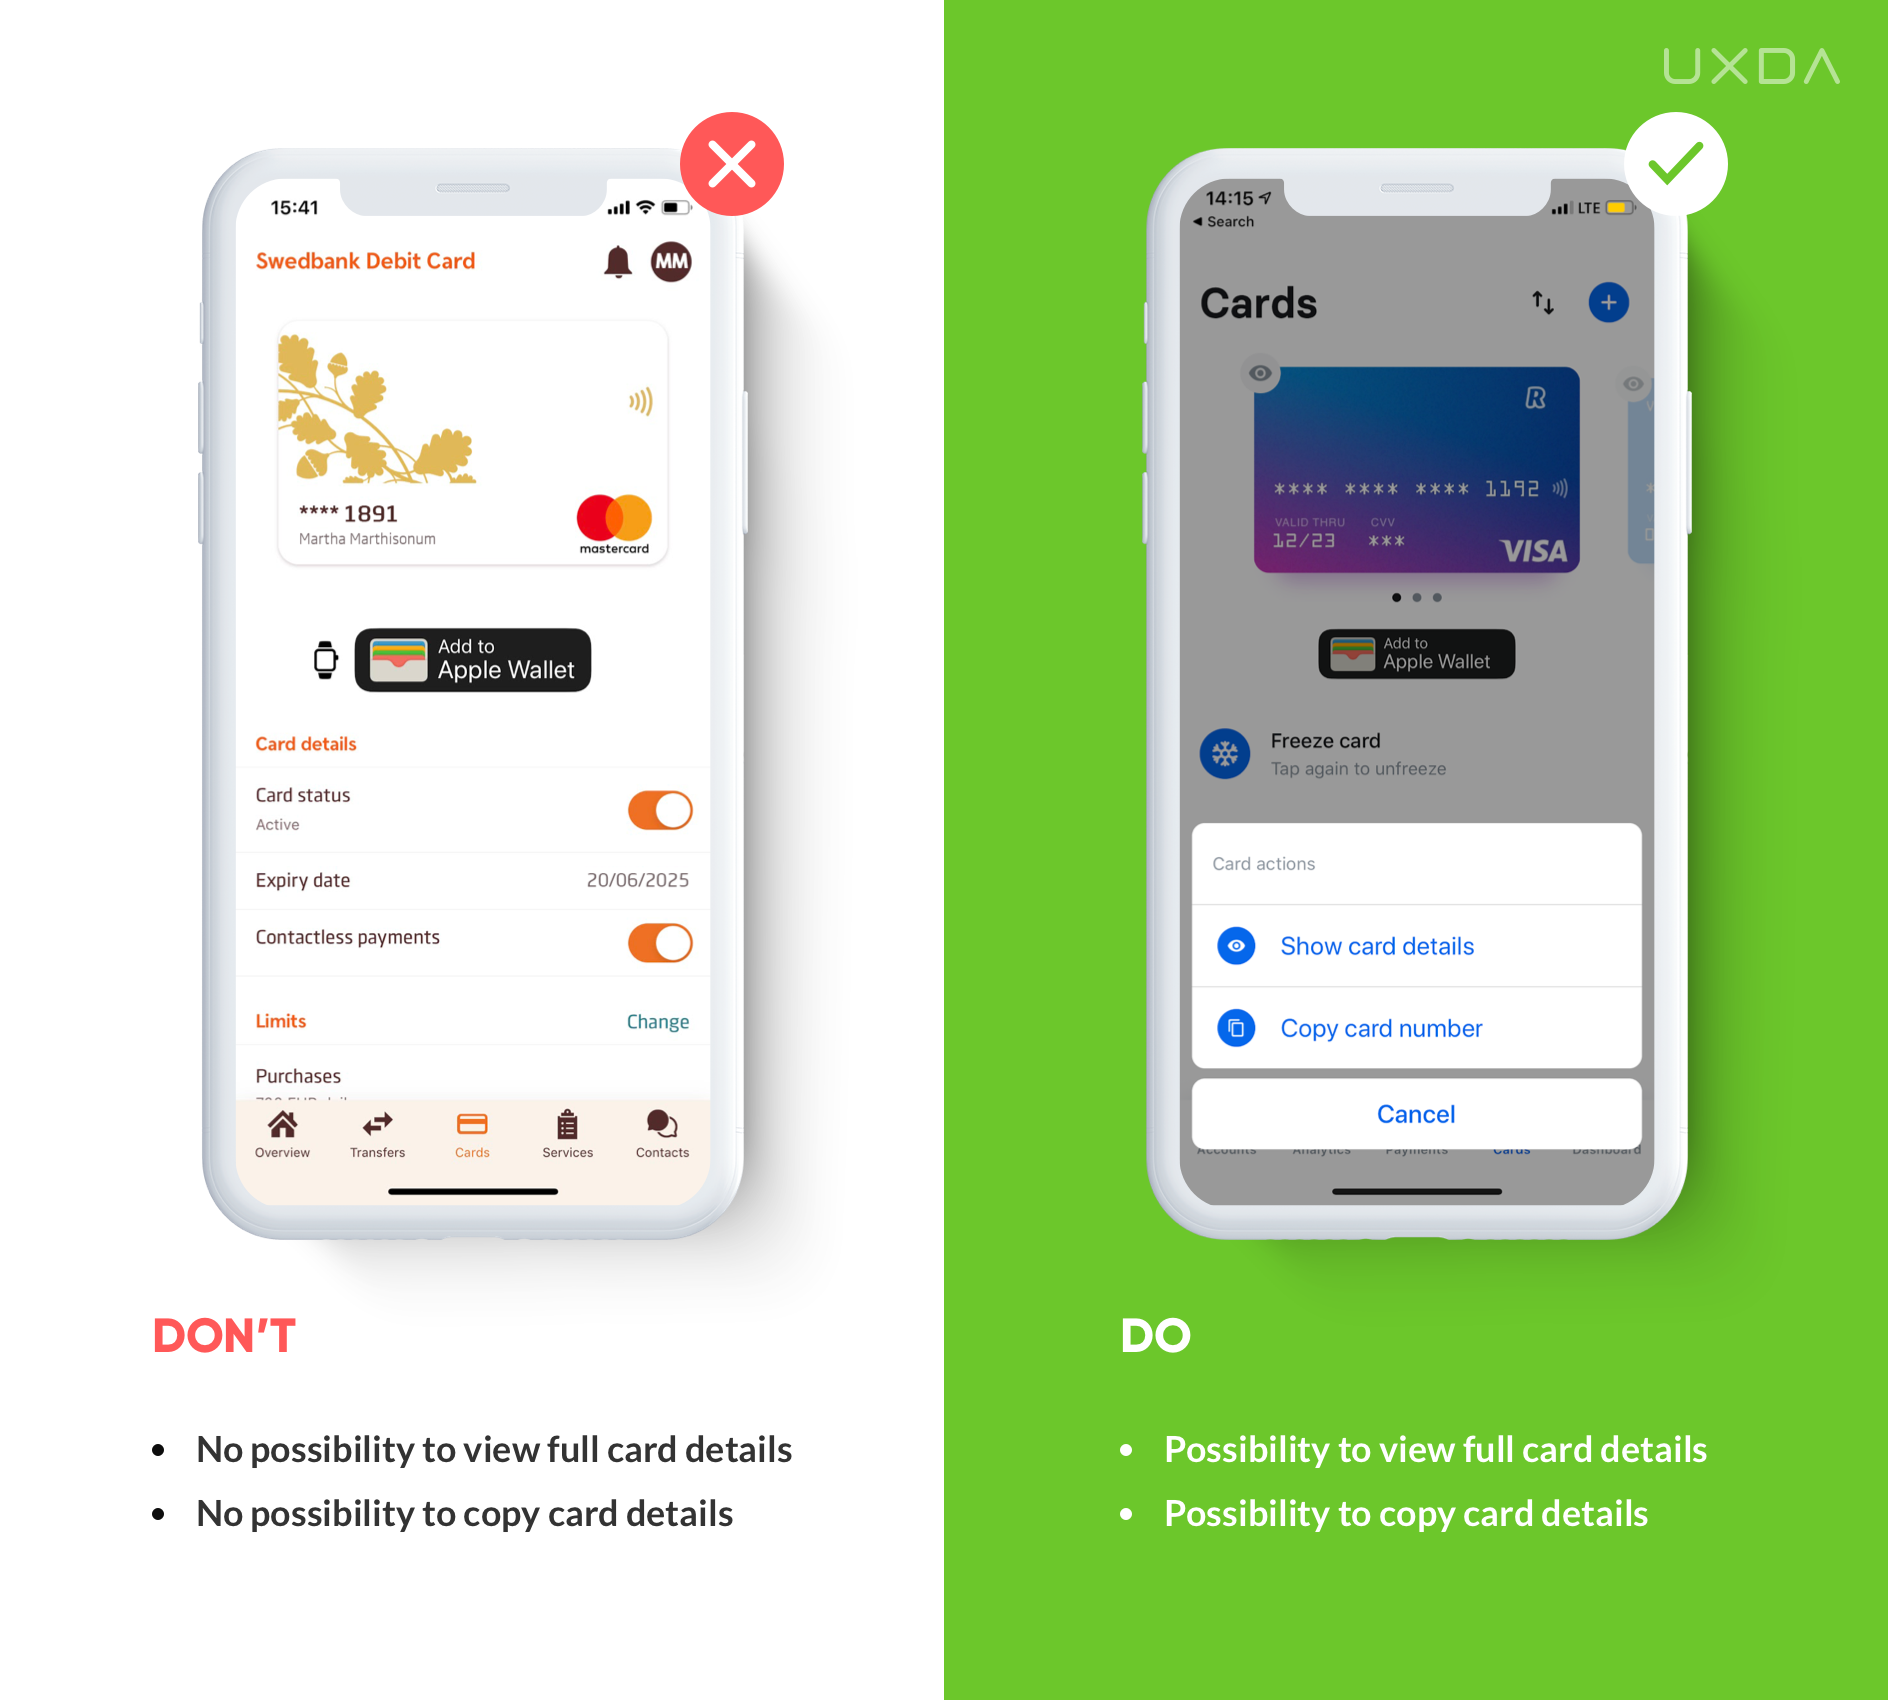 Fintech UX / UI Guide: TOP 20 Tips to Improve Mobile Banking Solutions Design - Copy details